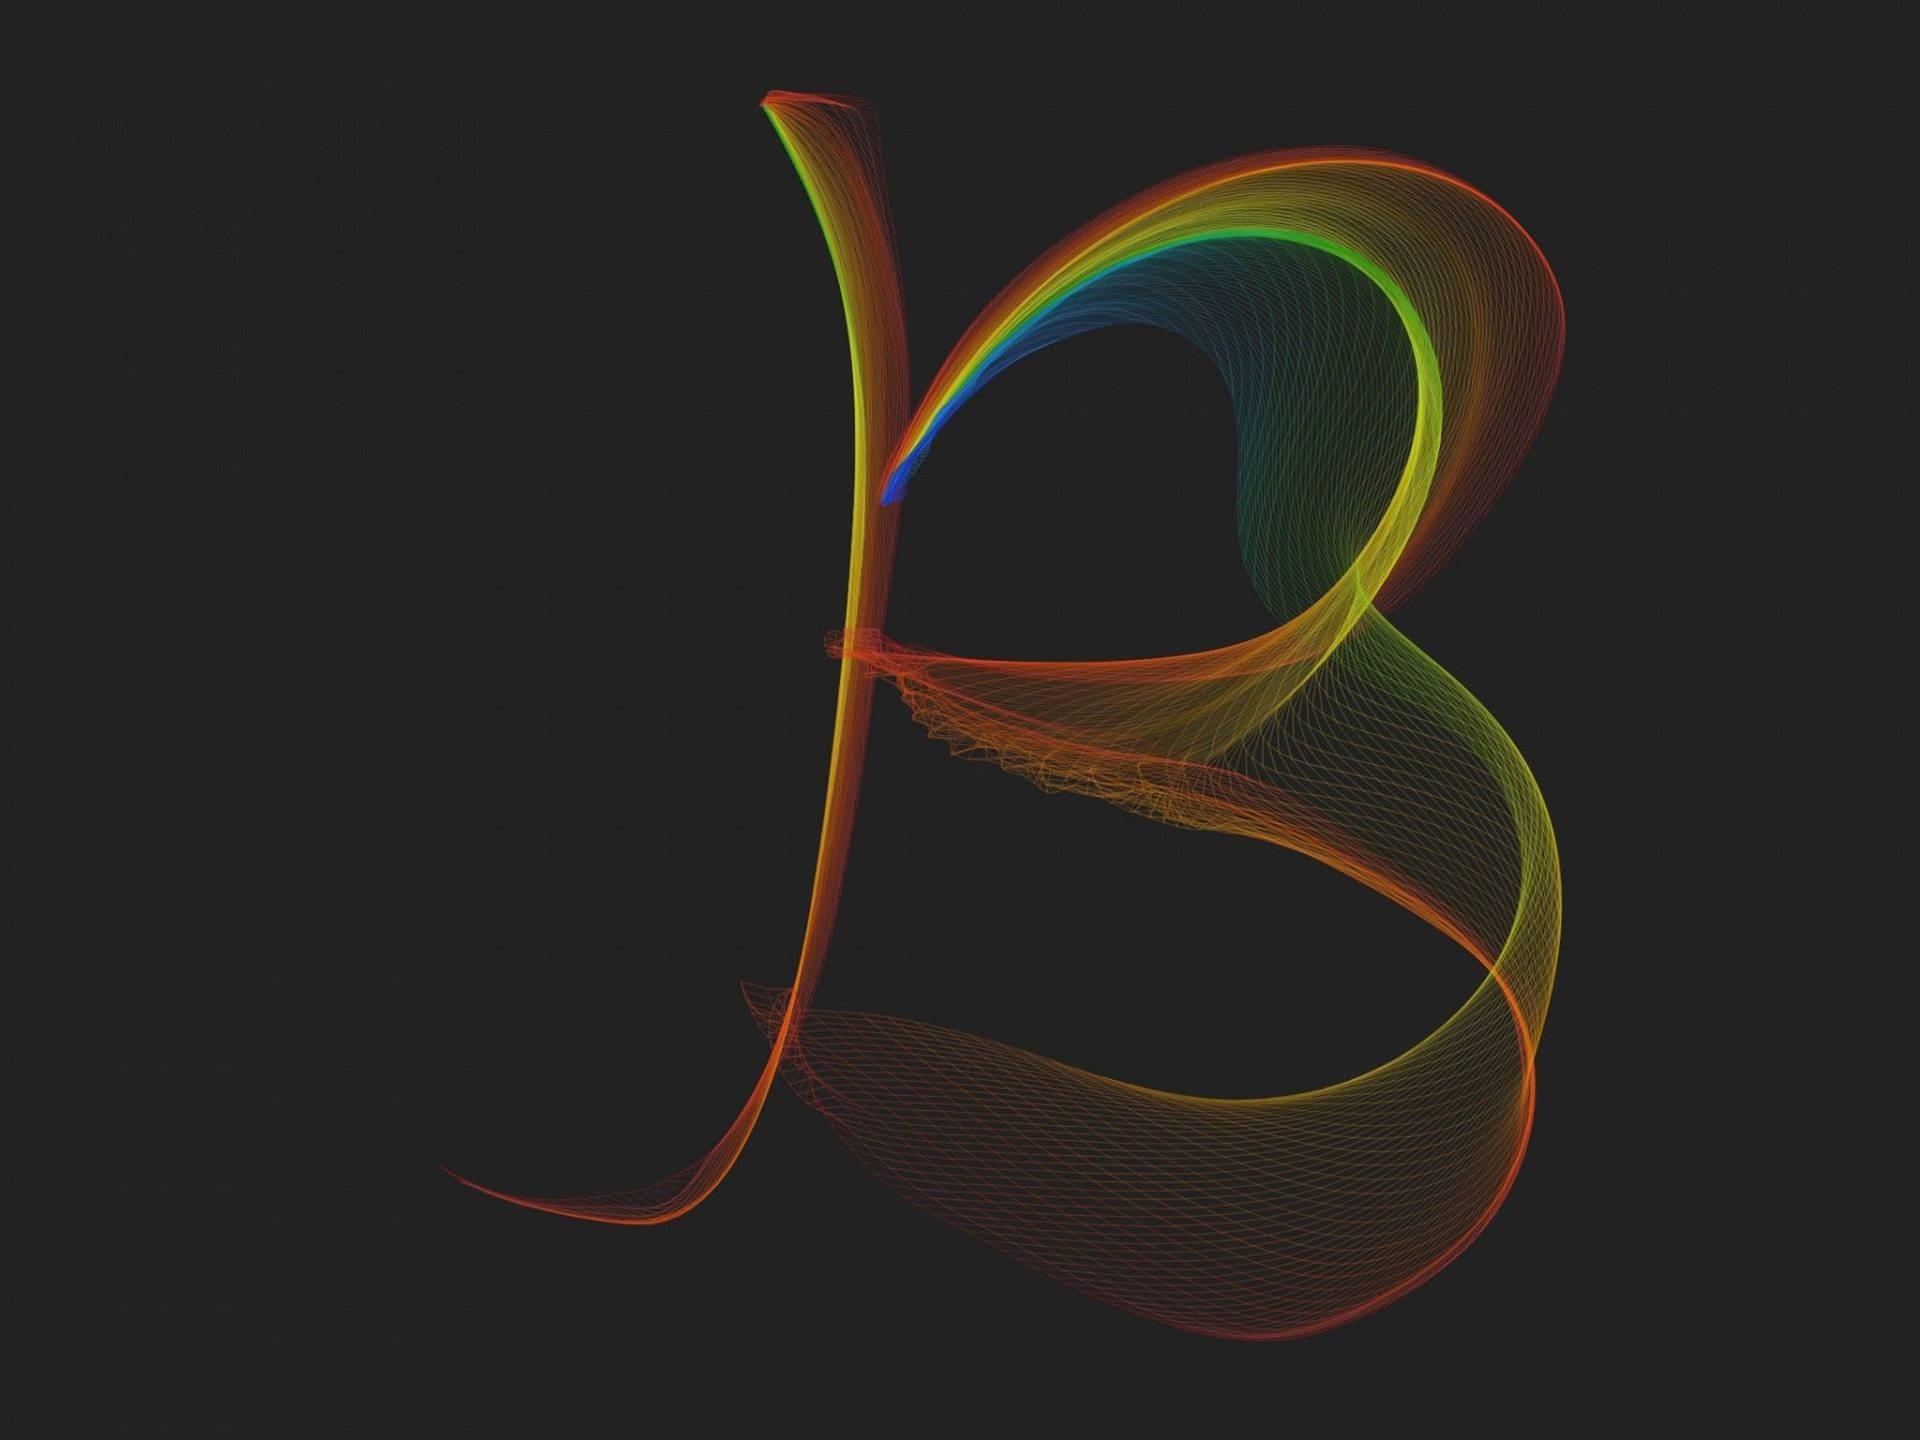 Free Letter B Wallpaper Downloads, [100+] Letter B Wallpapers for FREE |  